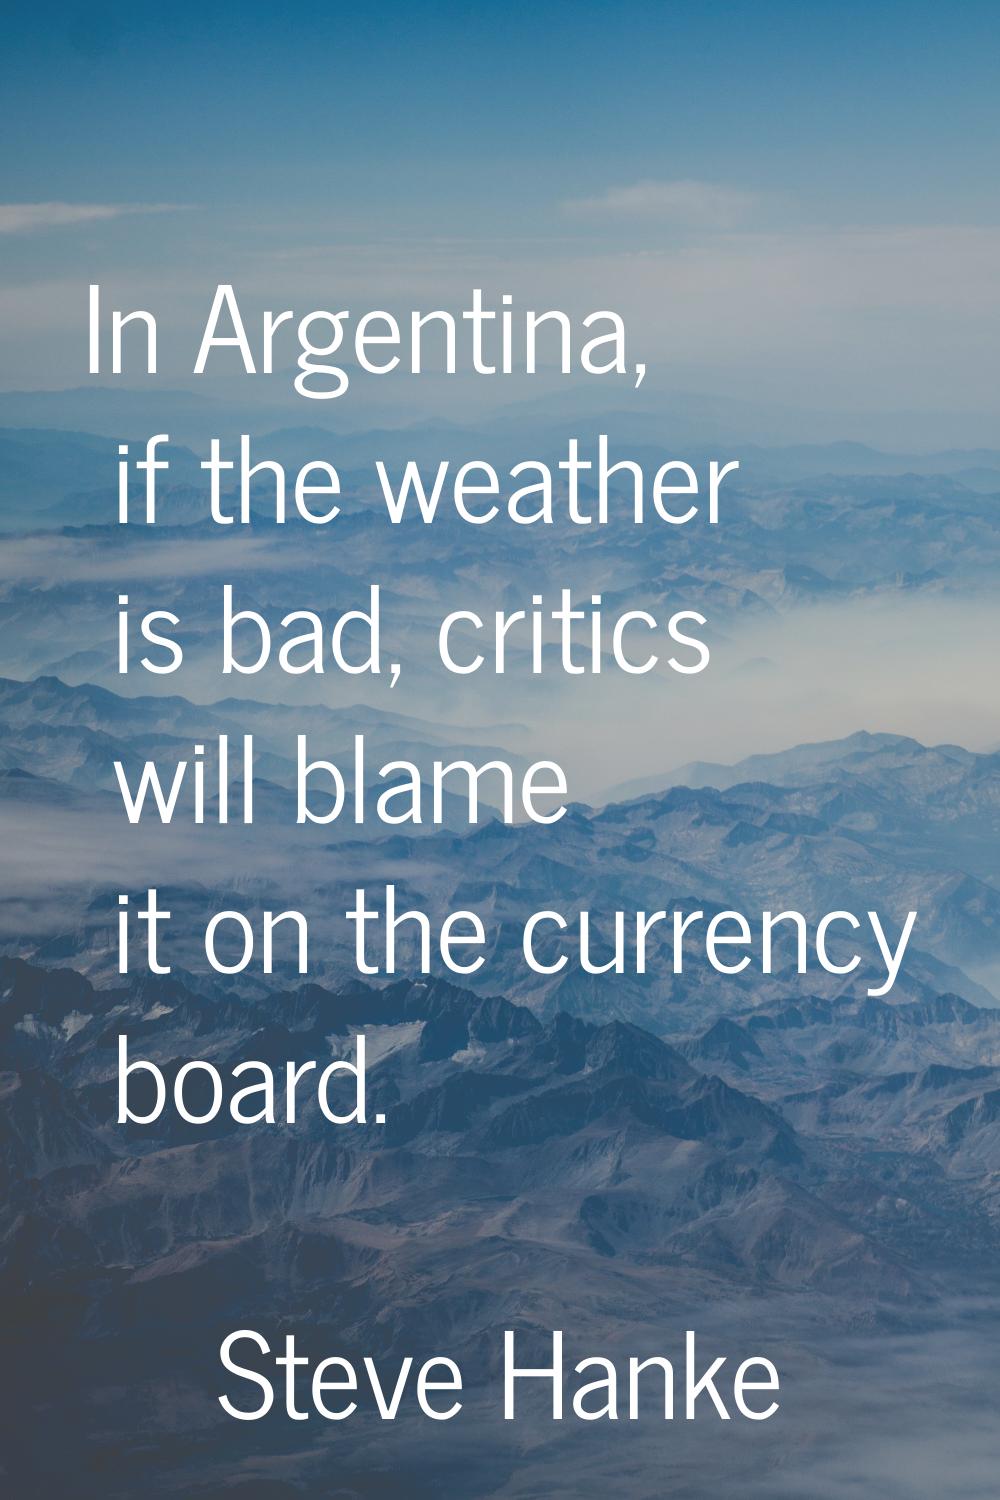 In Argentina, if the weather is bad, critics will blame it on the currency board.